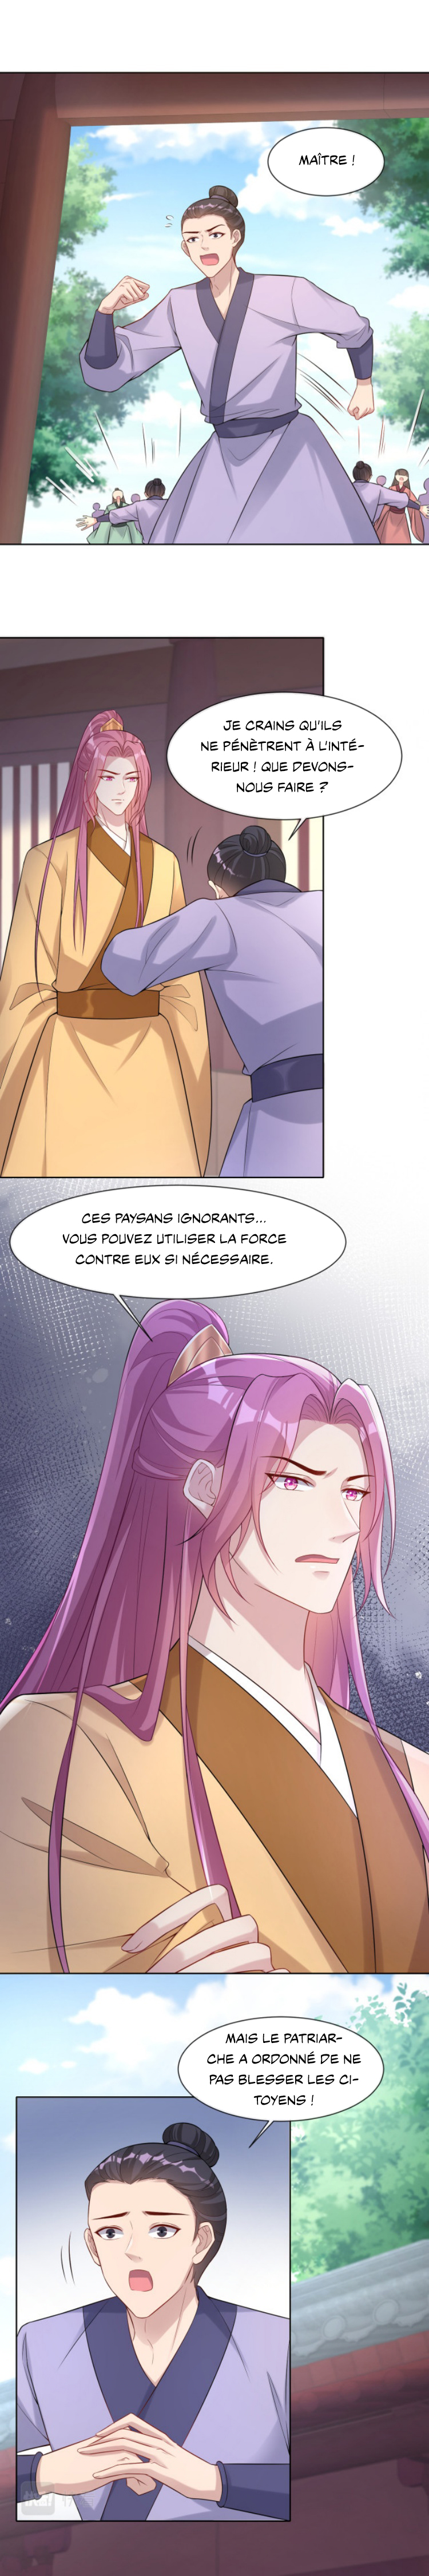 My Chubby Princess: Chapter 188 - Page 1